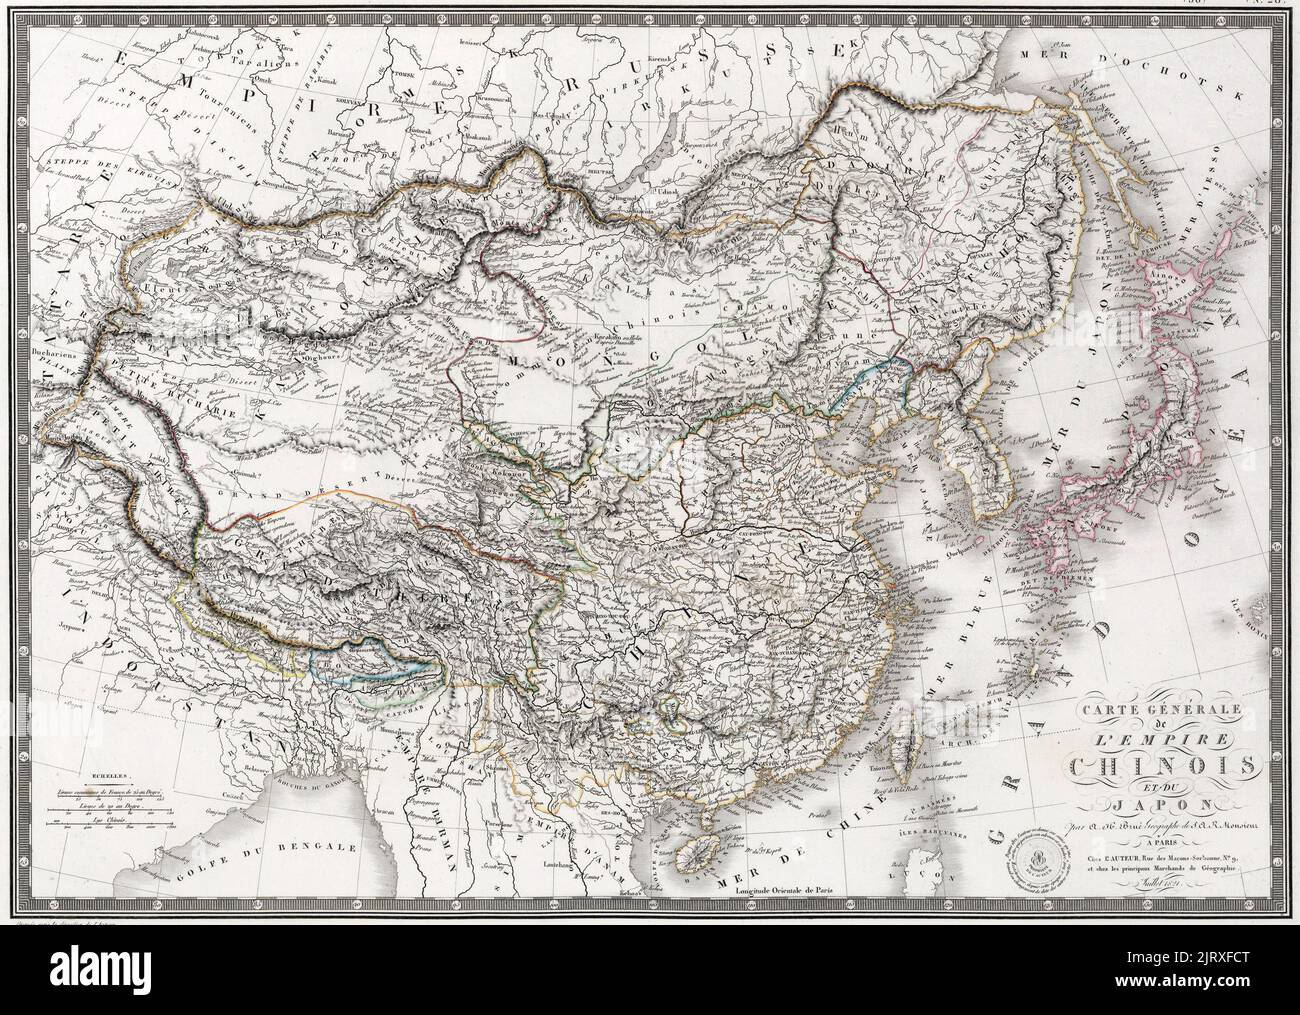 General Map of the Chinese Empire and Japan': A map of the Qing Empire and Japan published by J. Andriveau-Goujon at Paris. Note the lower course of the Yellow River prior to the 1850s floods, circa 1821 Stock Photo